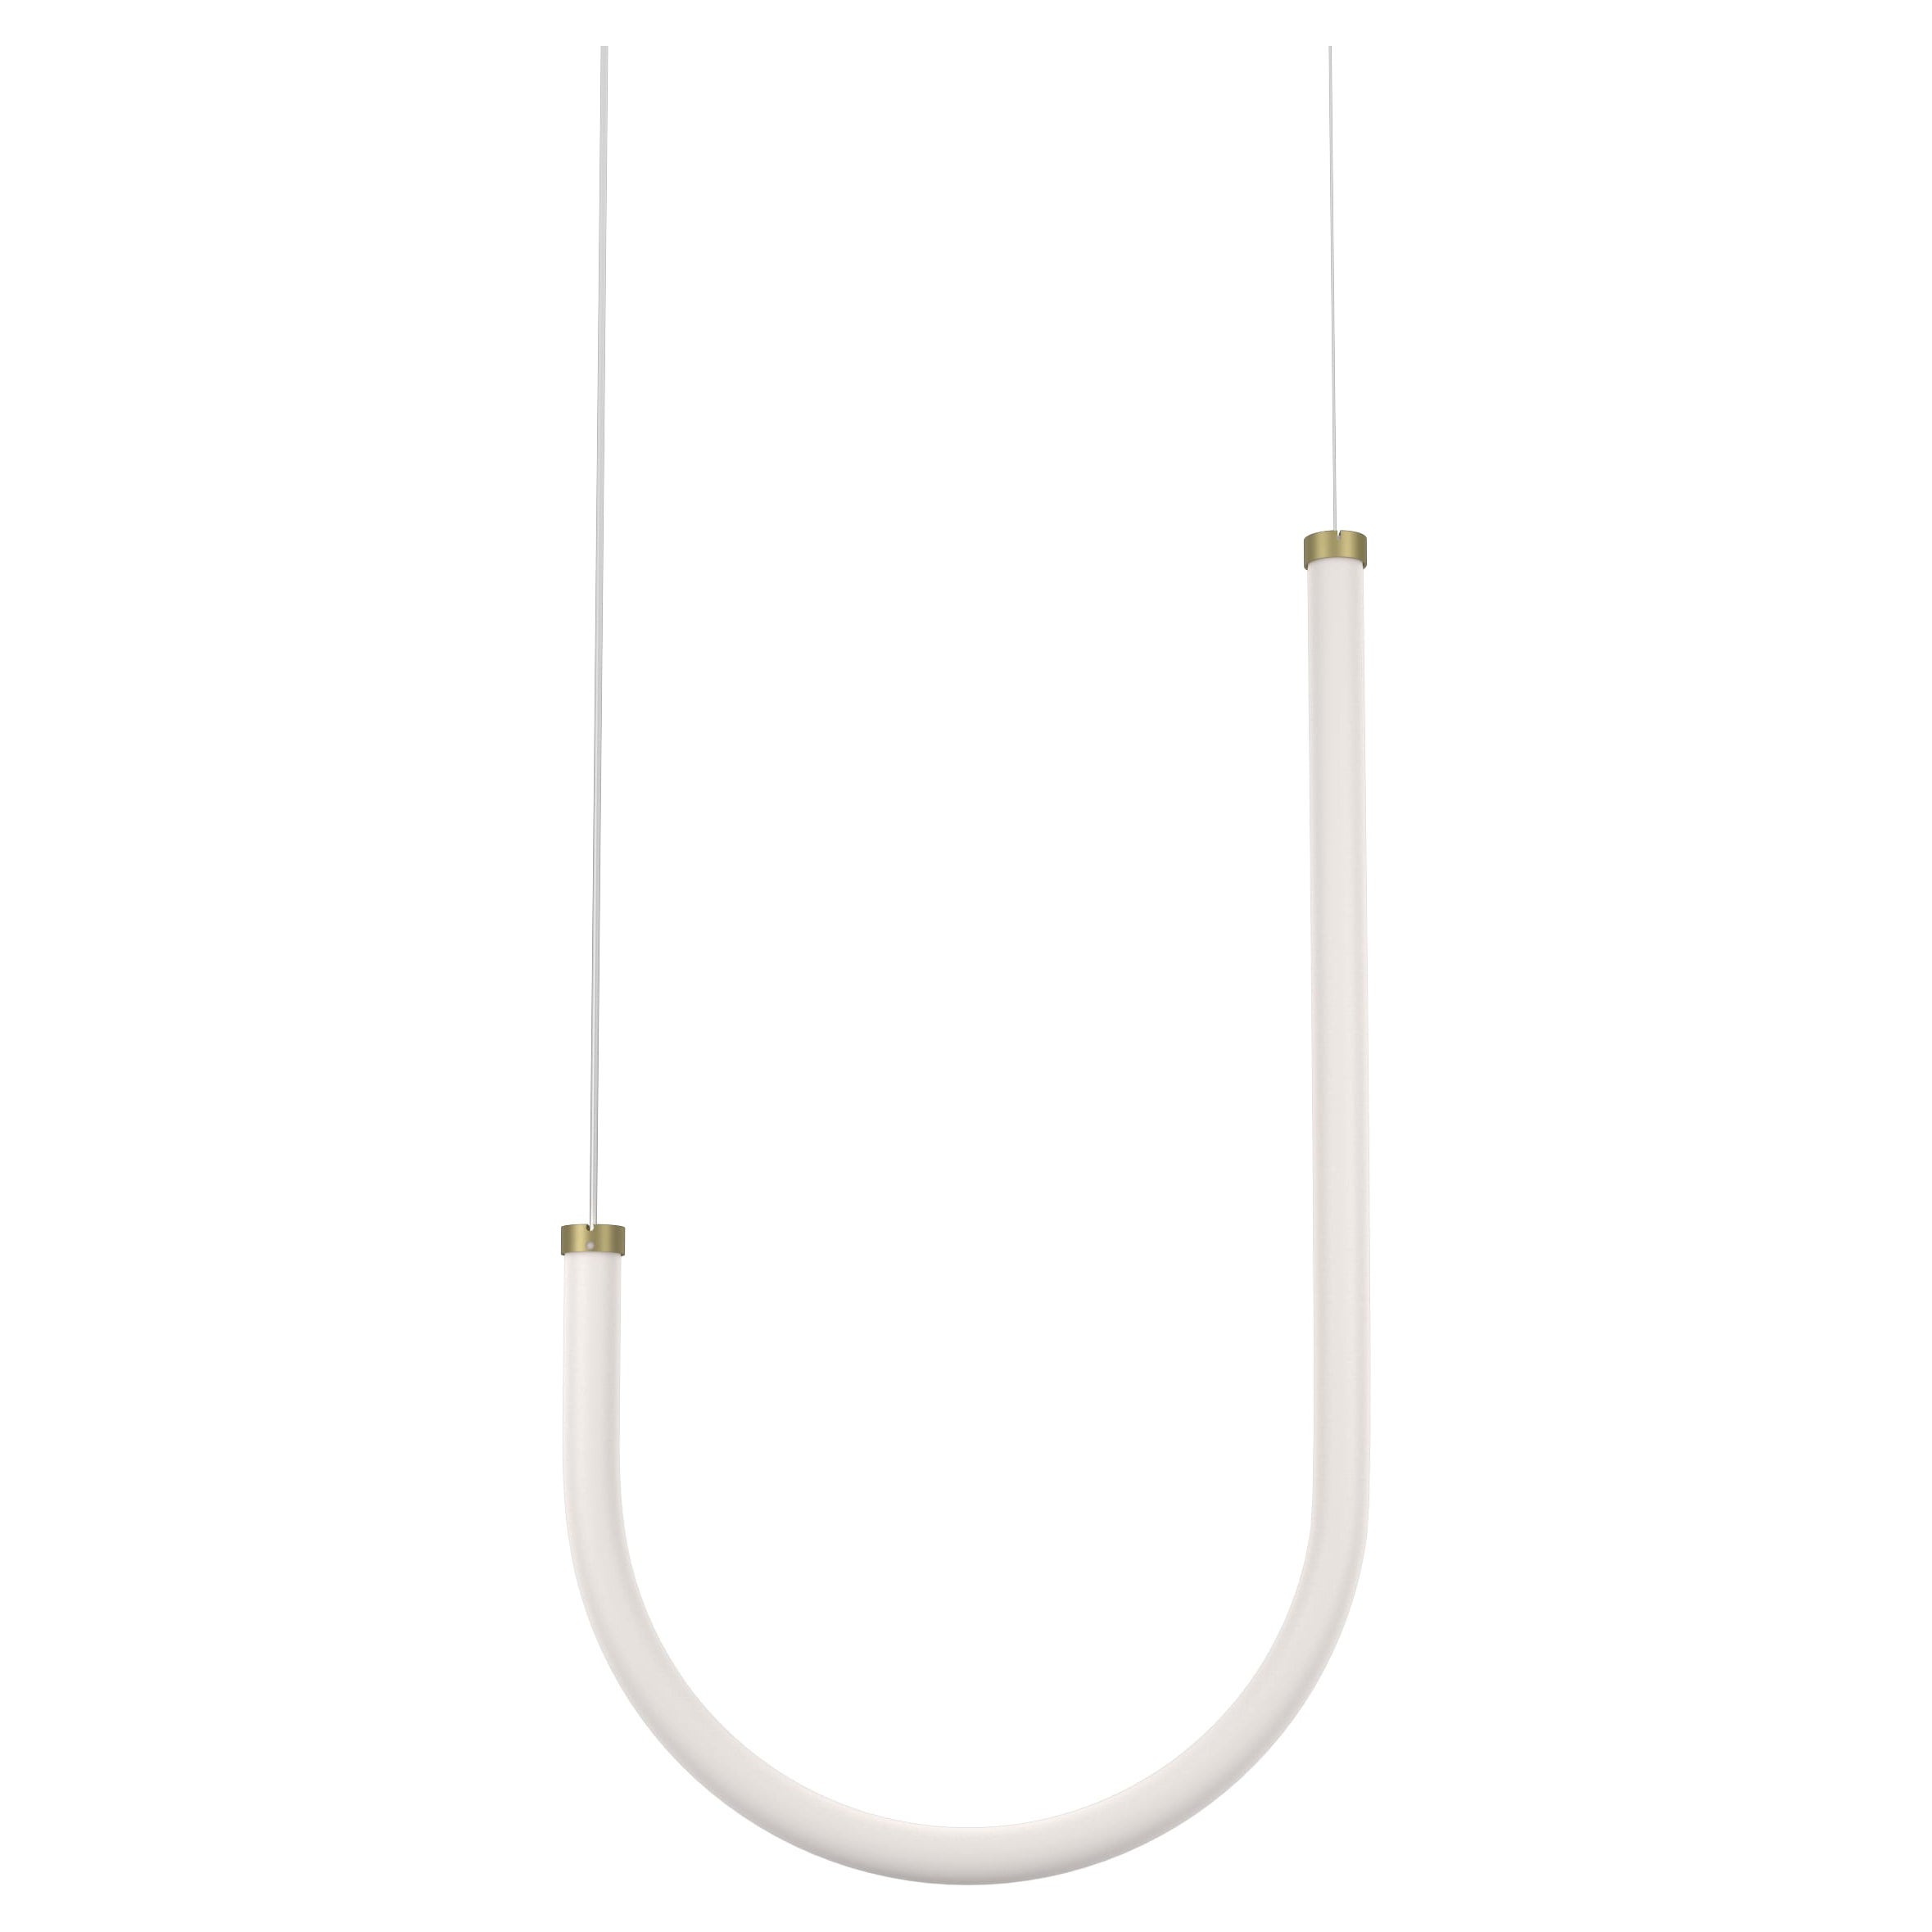 Petite Friture Unseen Pendant Lamp J in Brass Transluscent with Curved LED-Light